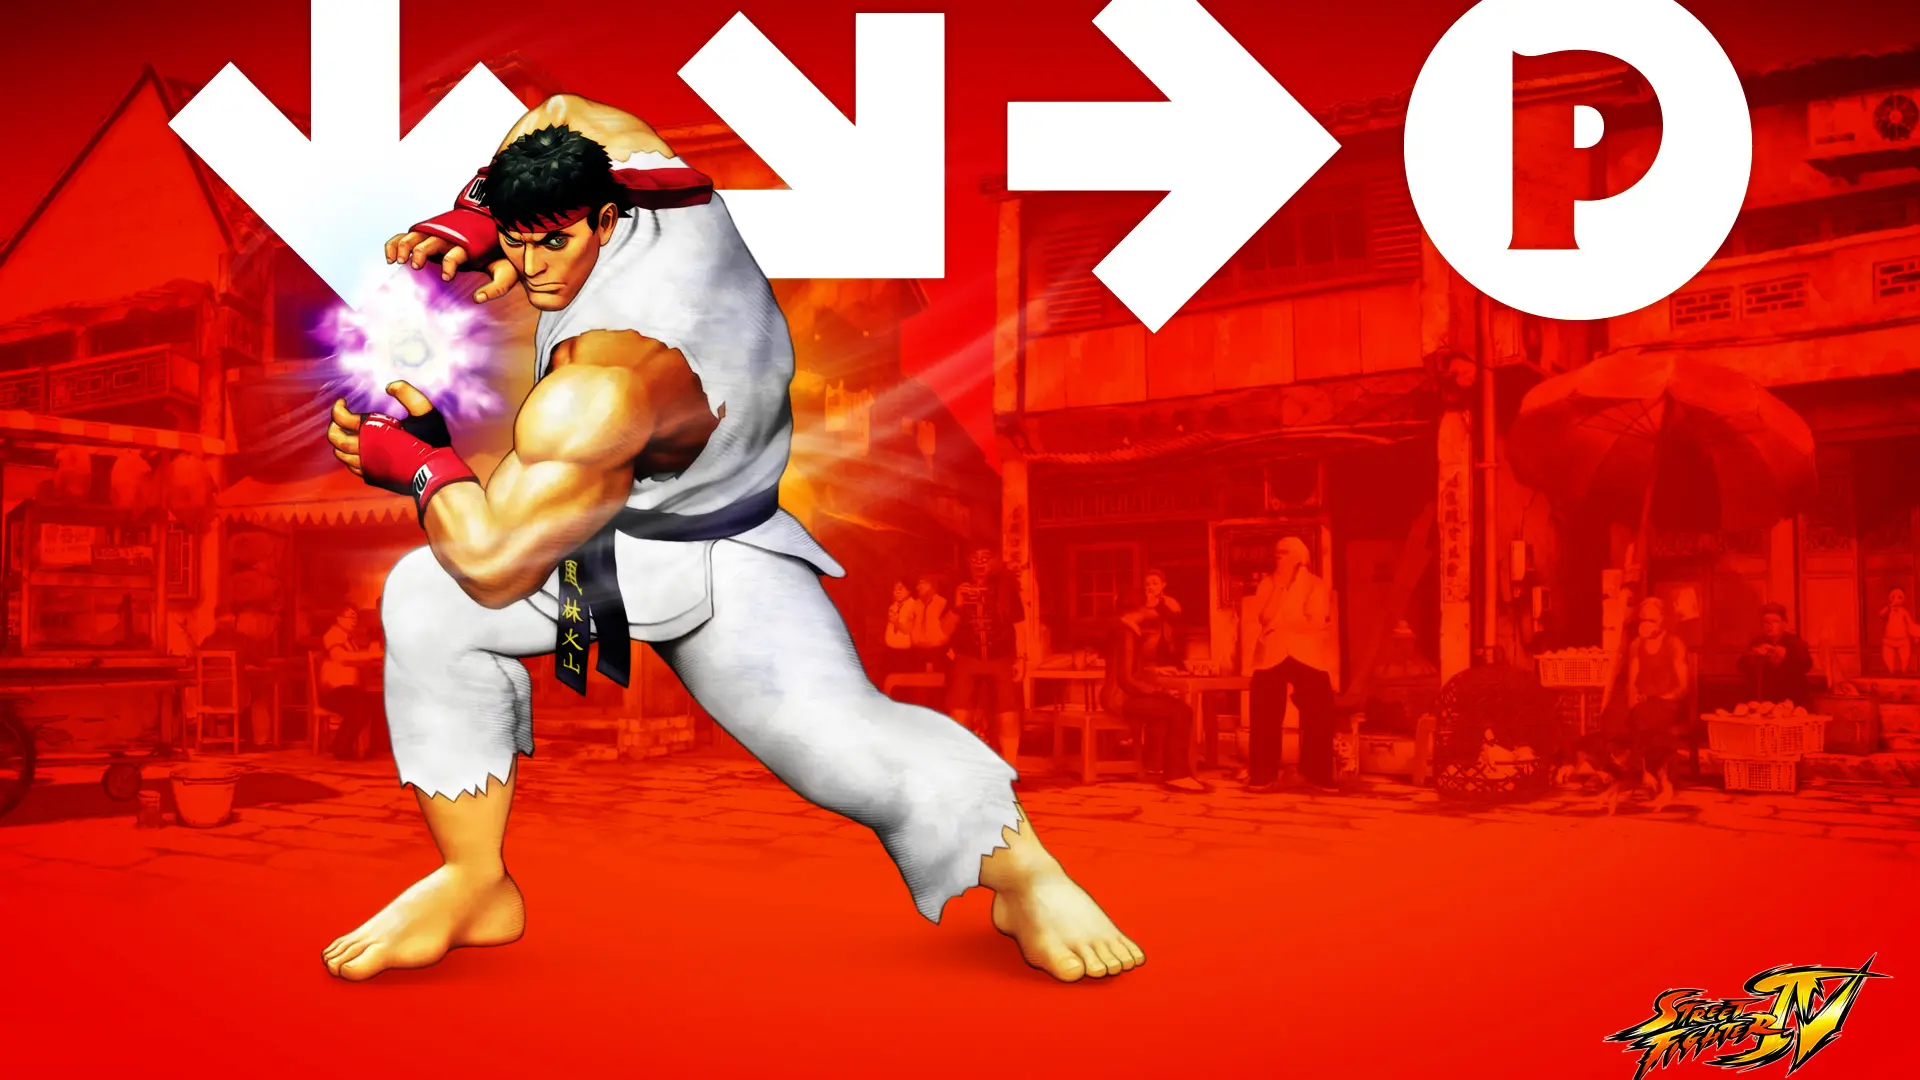 Game Street Fighter 4 wallpaper 2 | Background Image